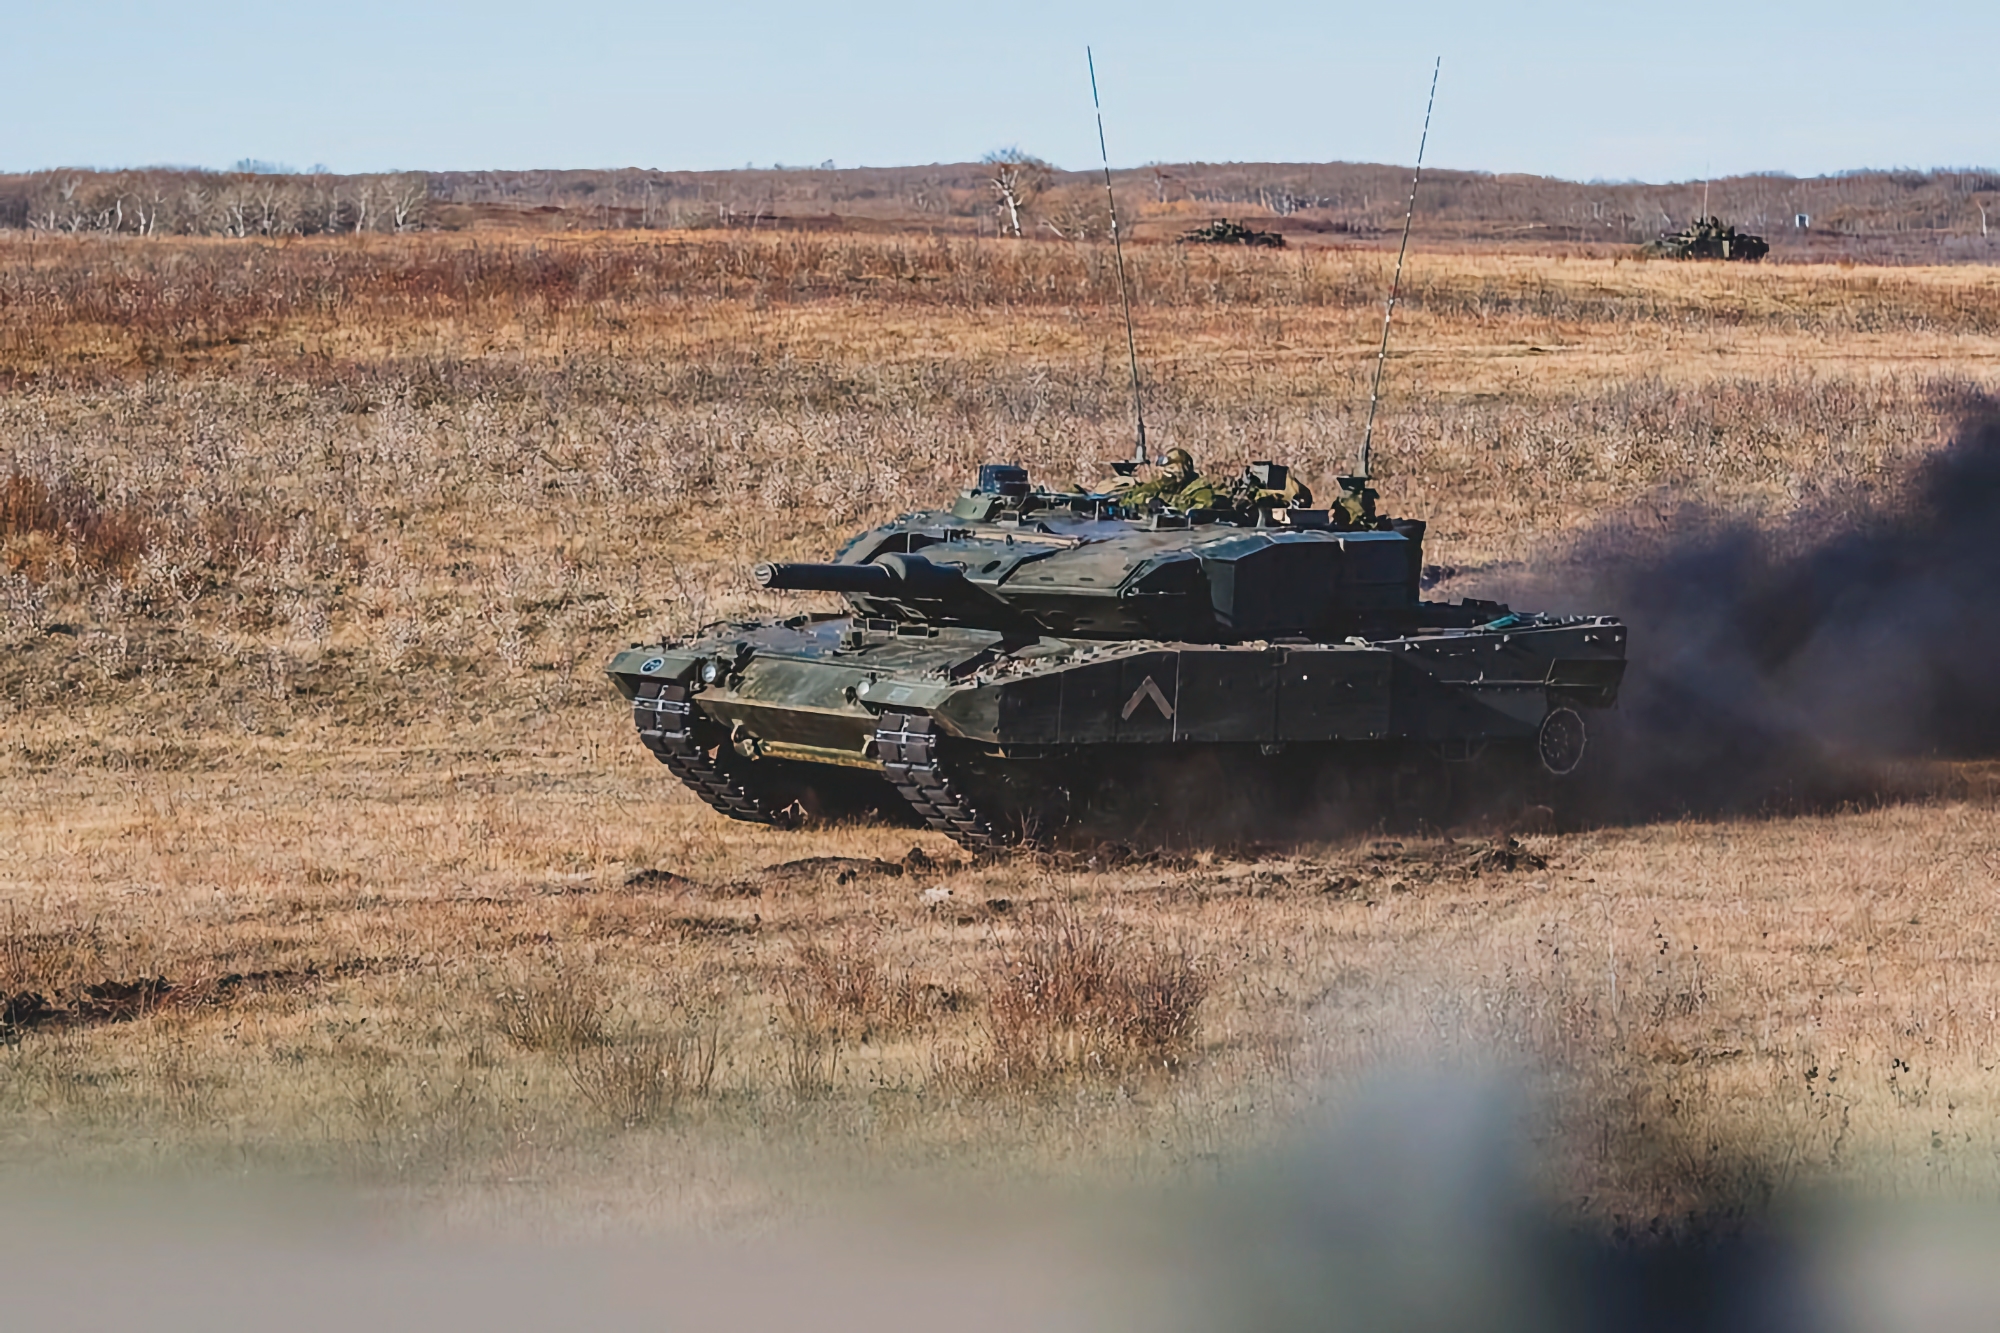 CBC News: Canada plans to hand over four Leopard 2 tanks to Ukrainian Armed Forces